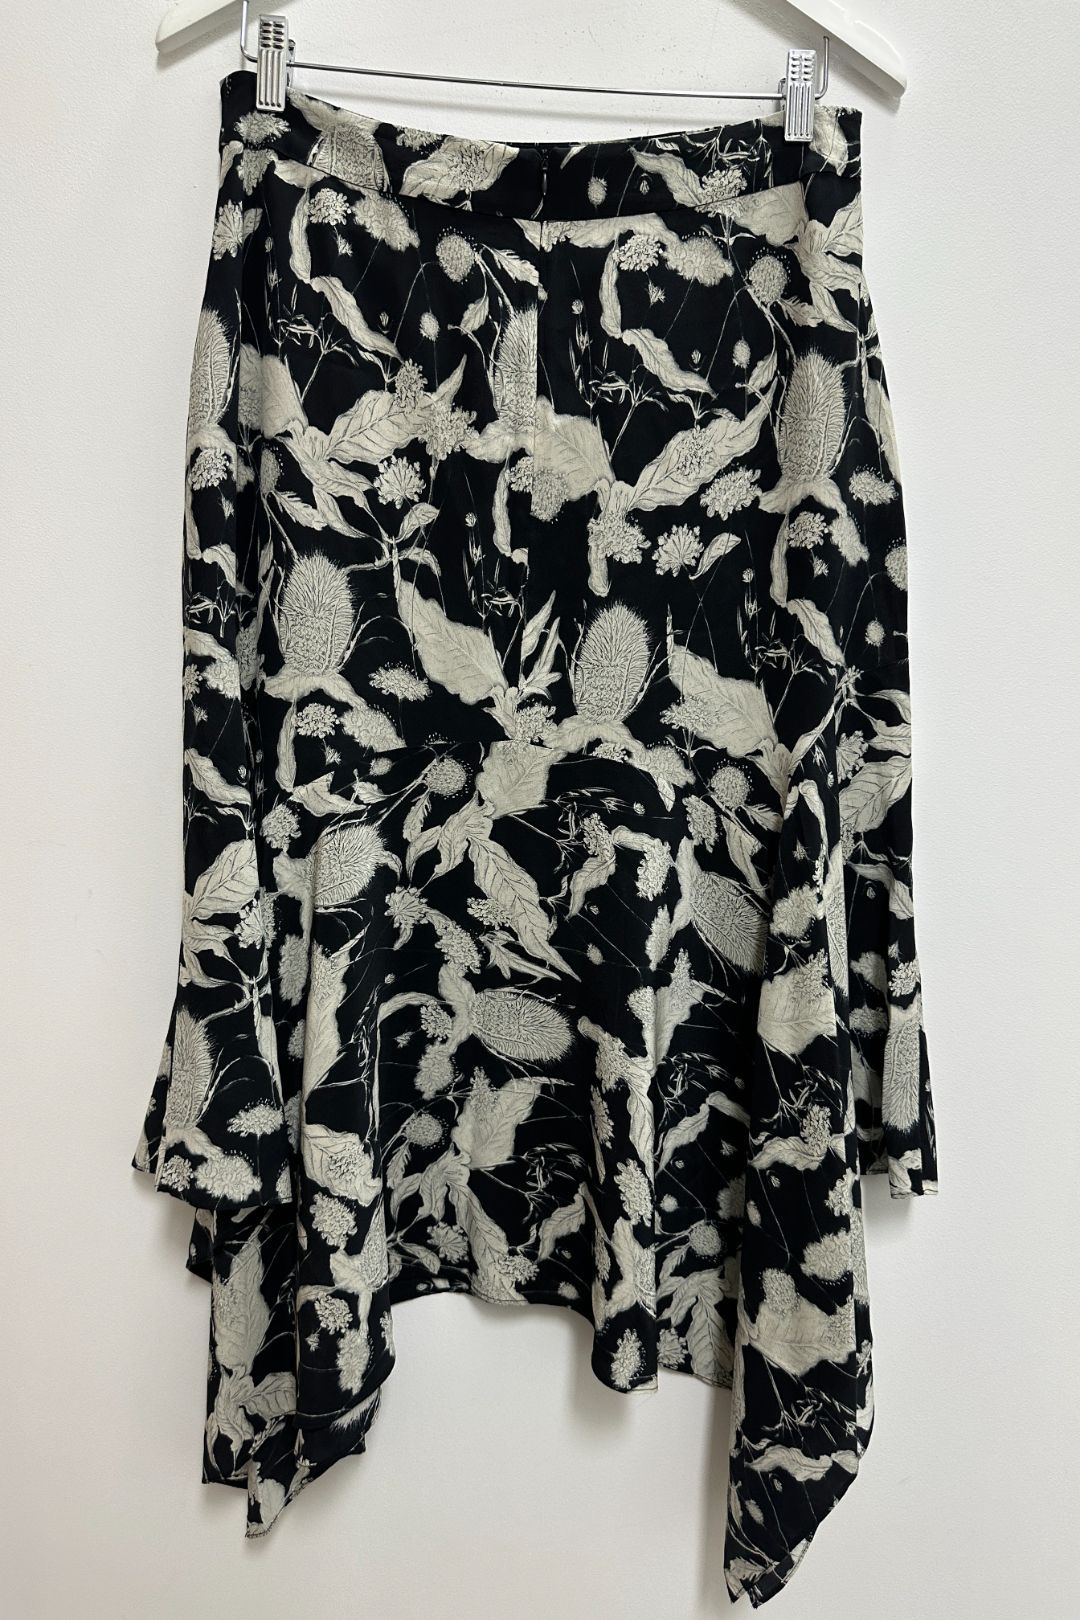 Husk Utopia Floral Maxi Skirt in Black and White